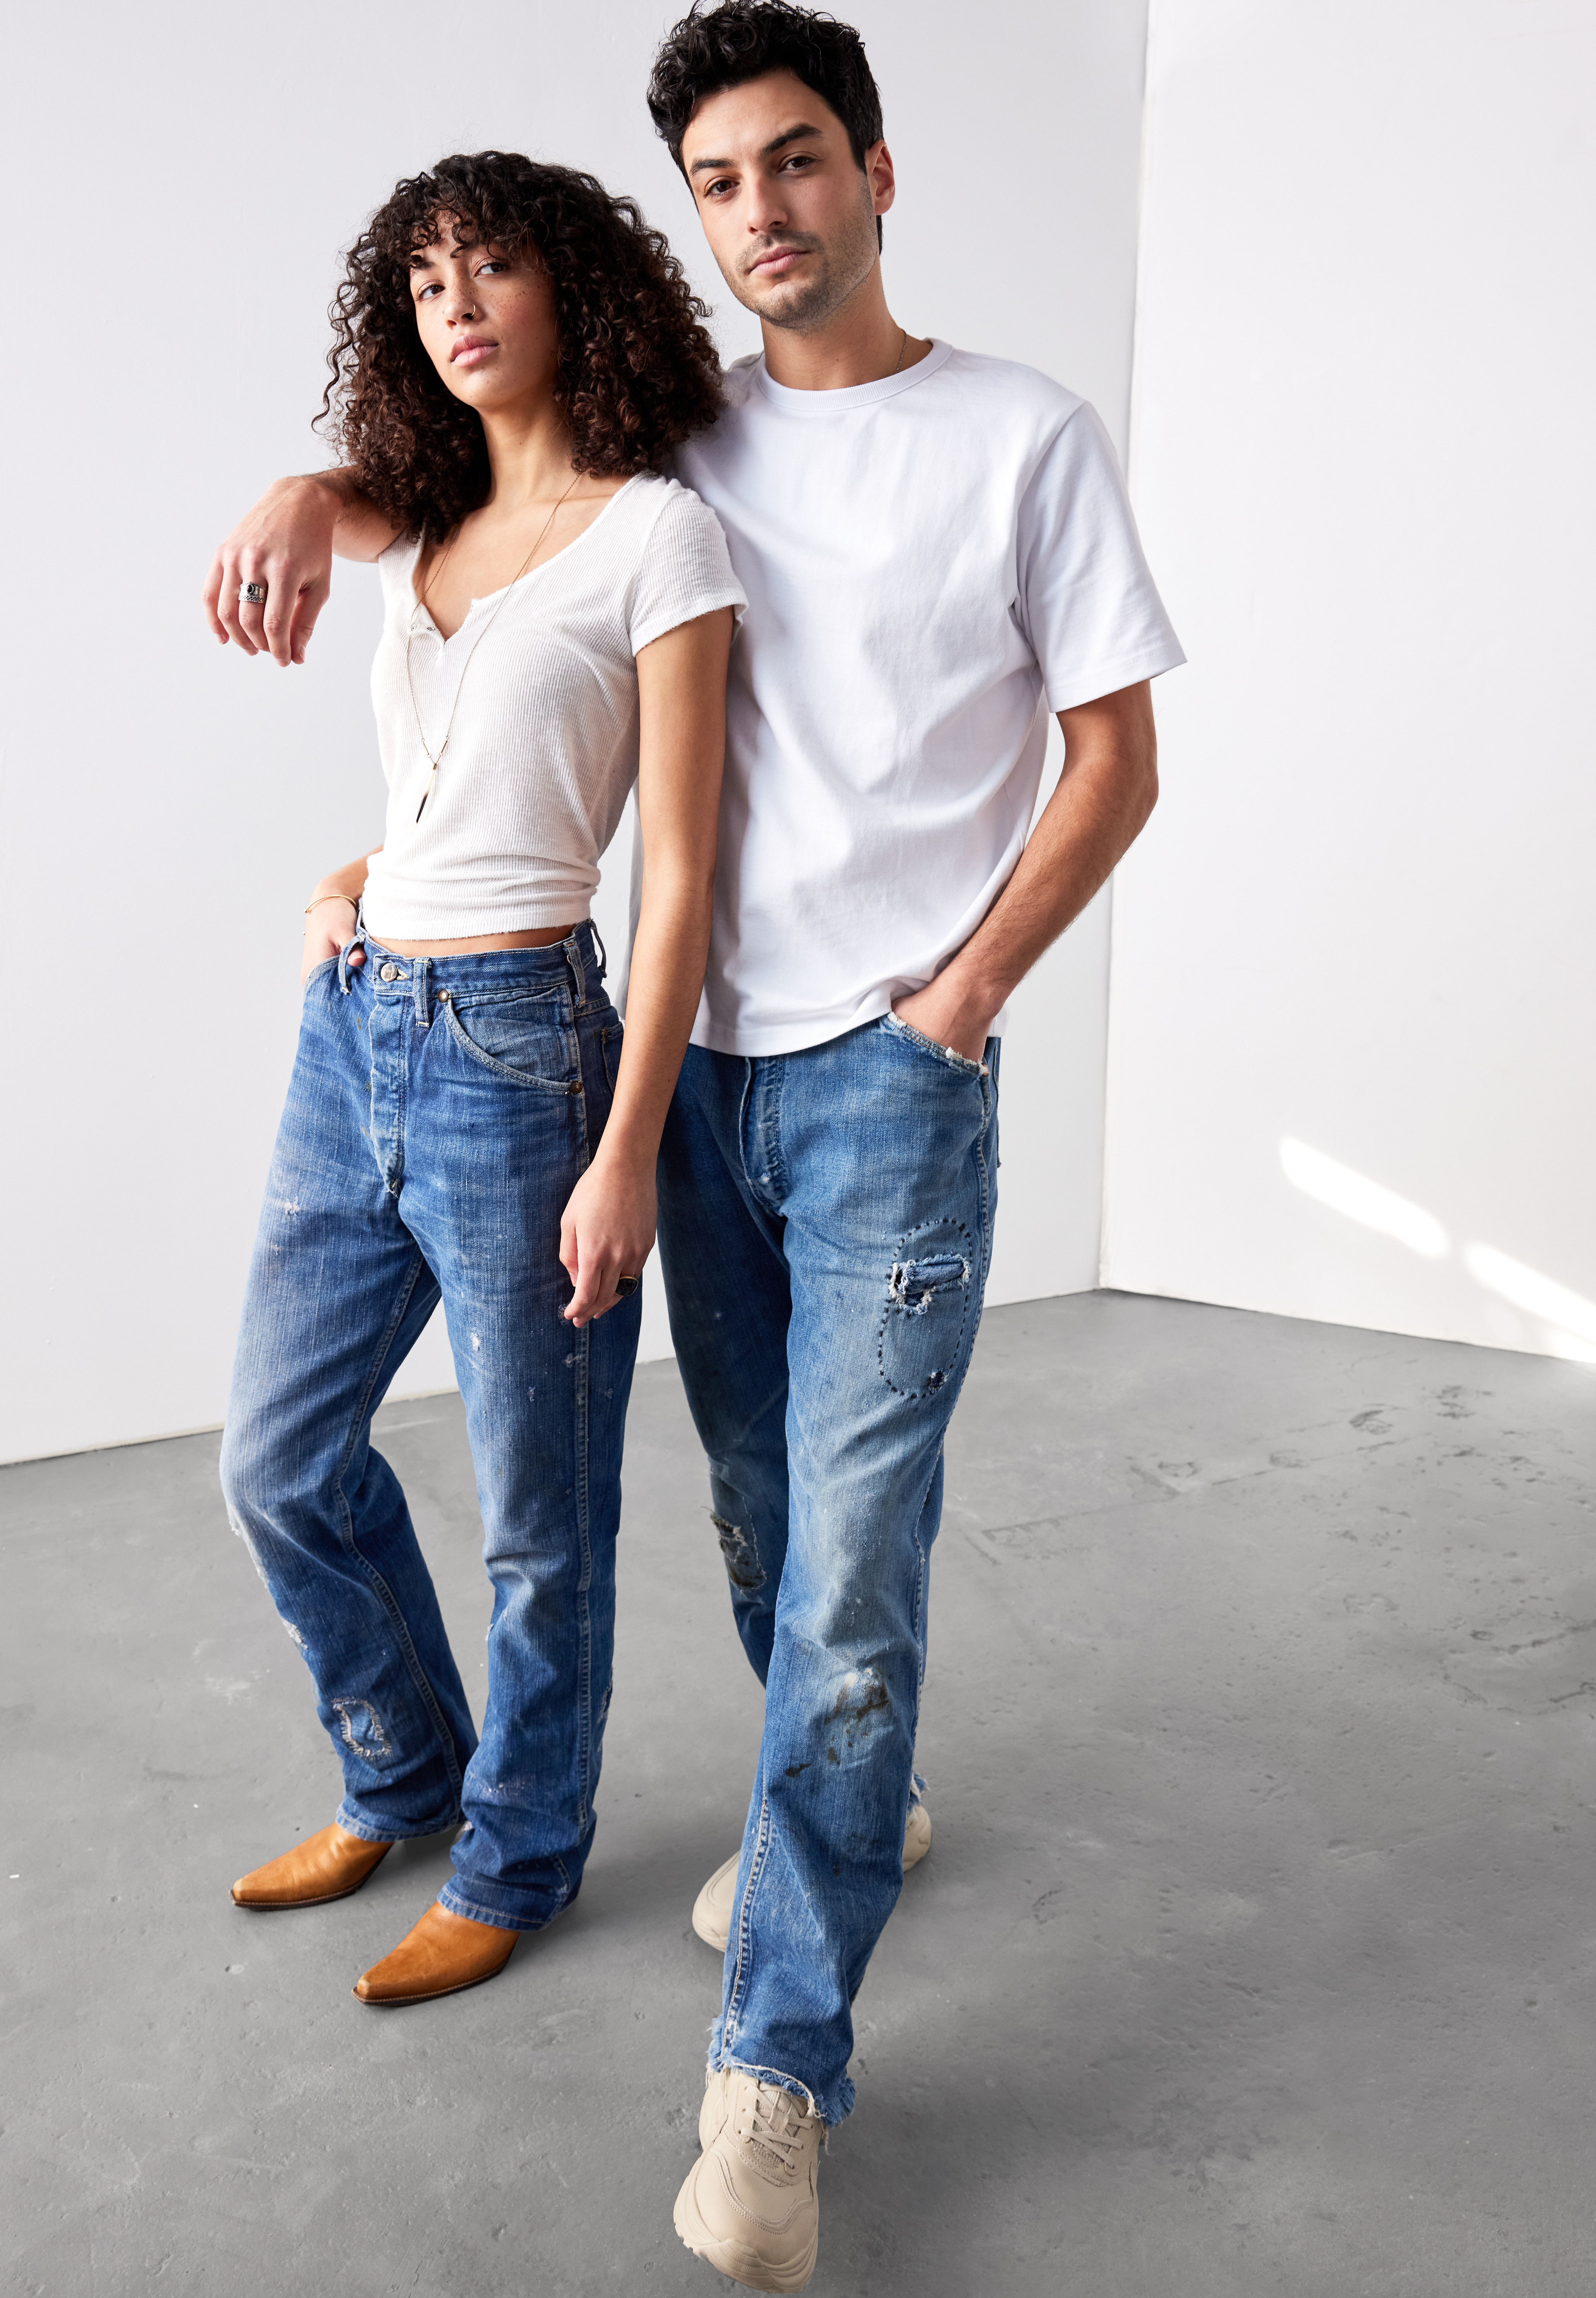 Wrangler® Releases Curated Collection of Vintage and Preloved Denim |  Business Wire